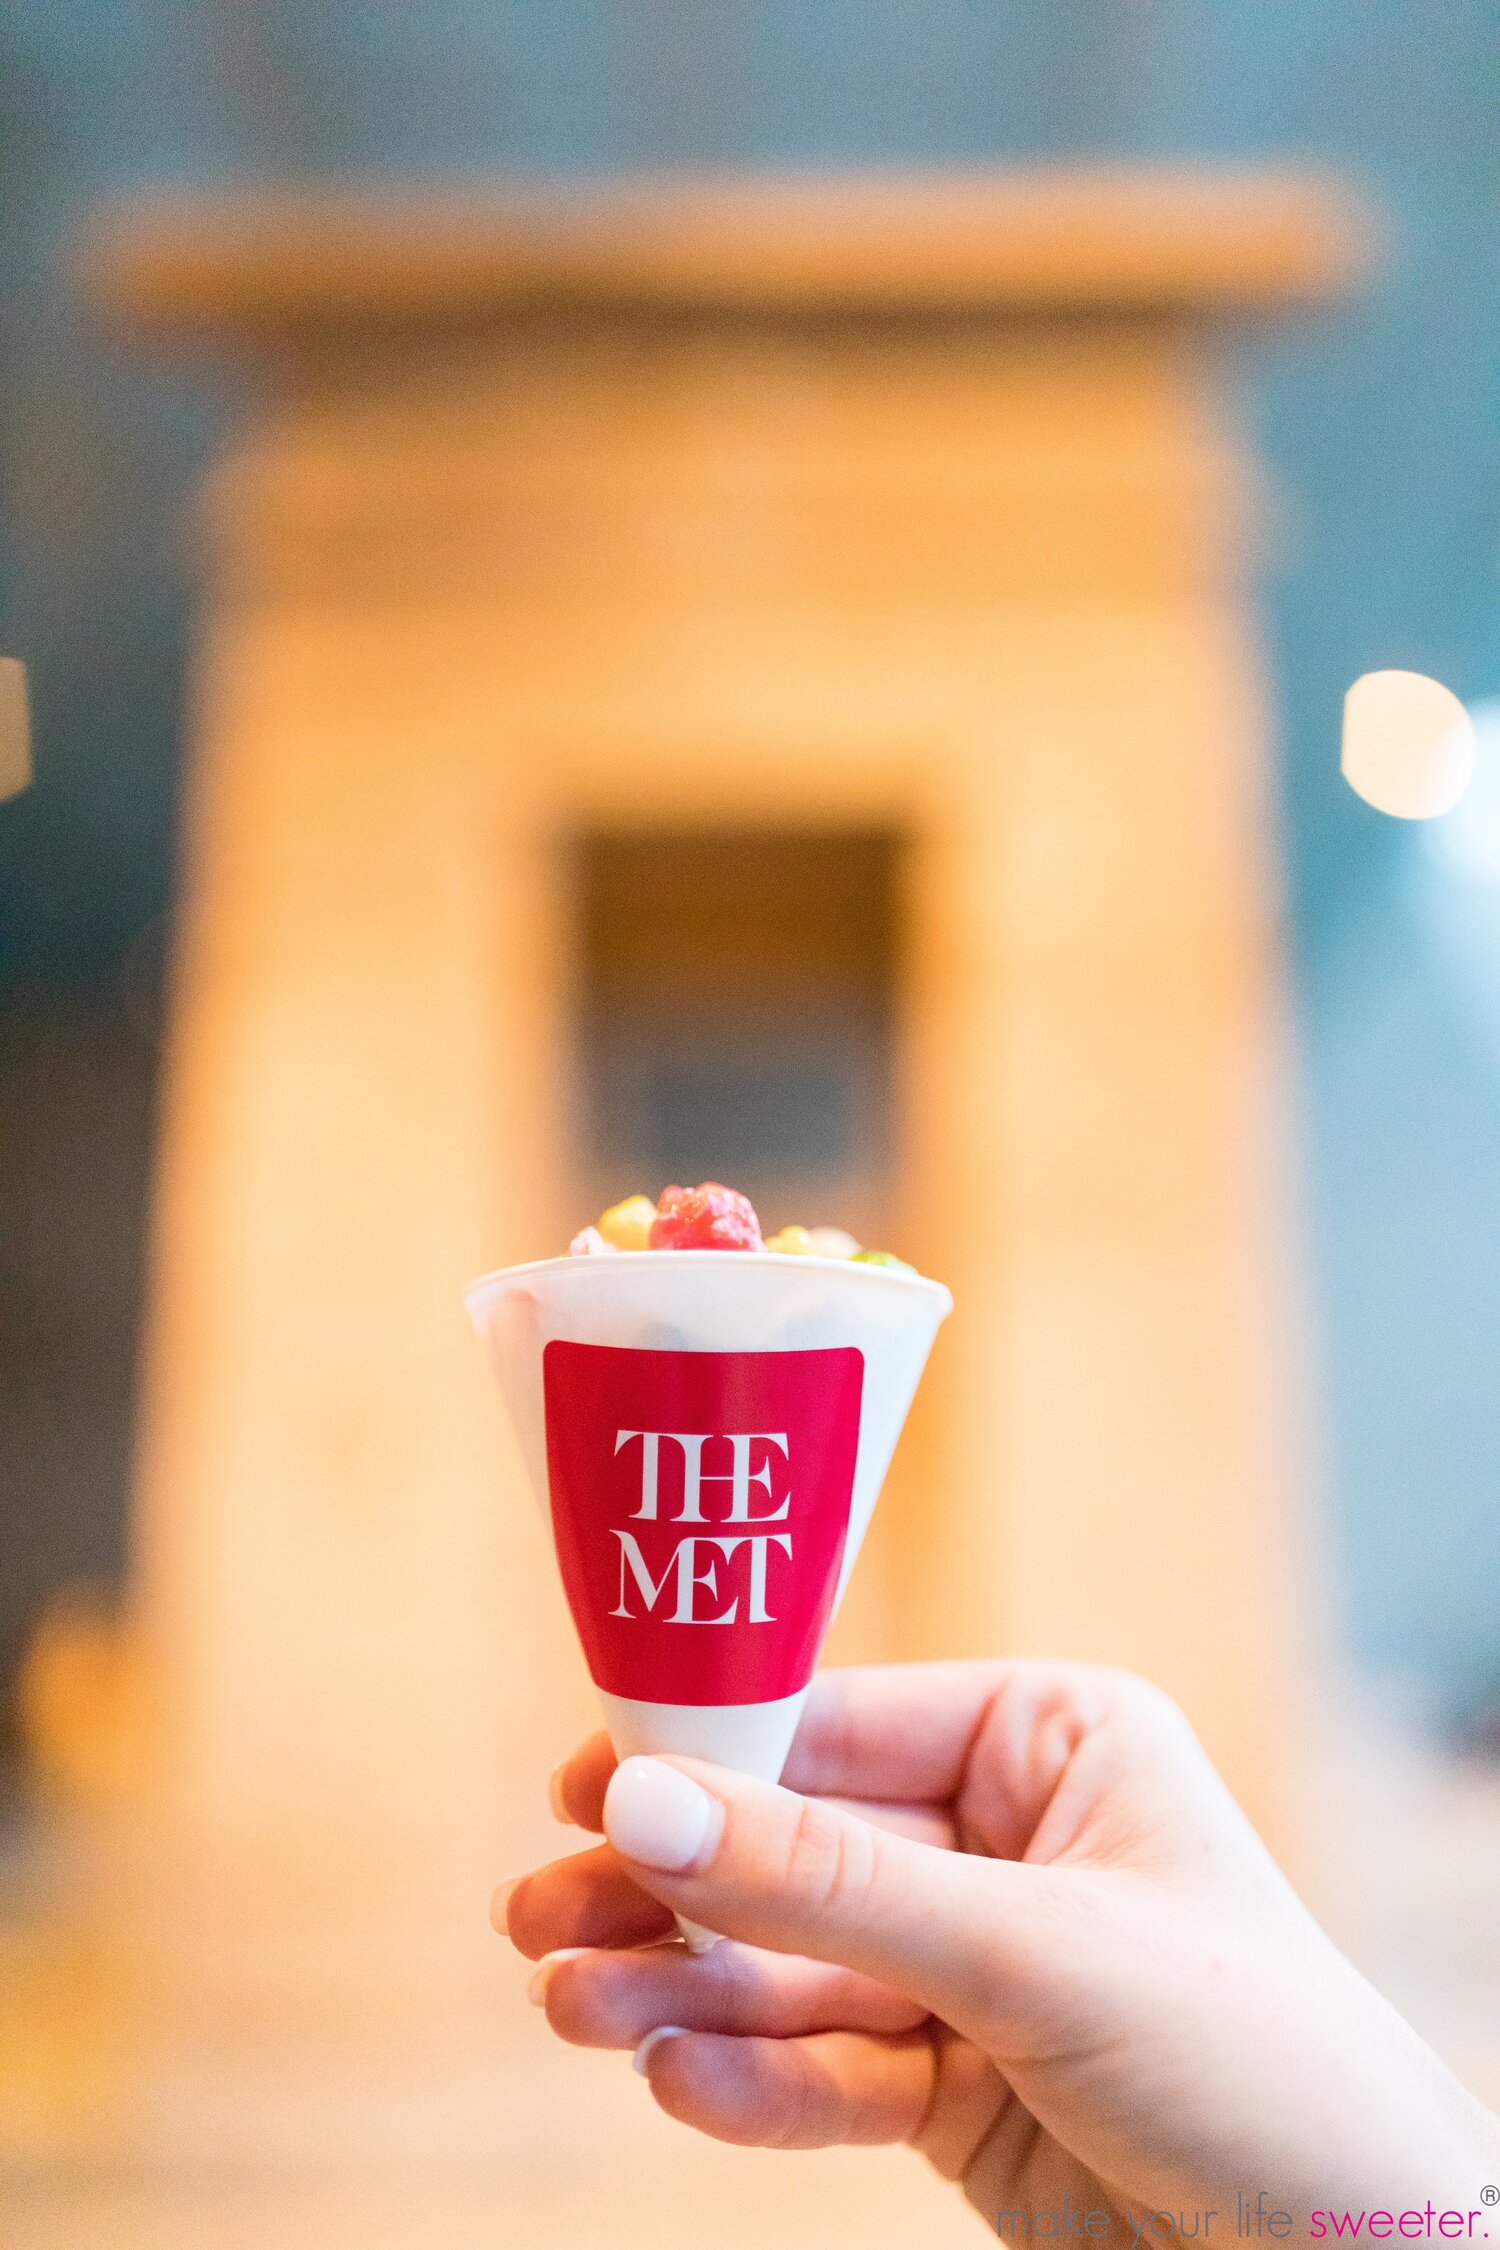 Super cute customized Hotpoppin cones for THE MET!